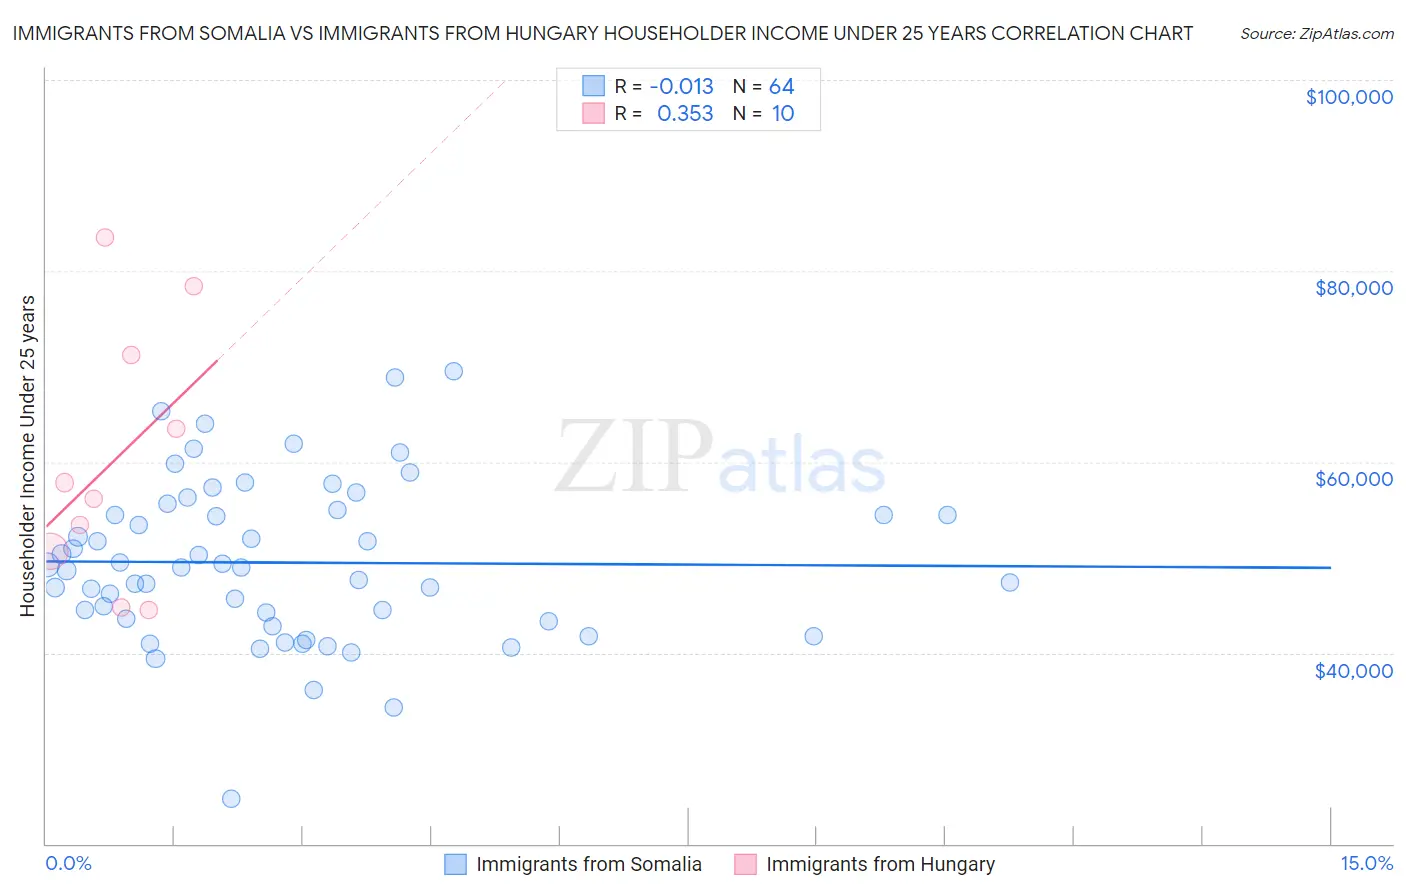 Immigrants from Somalia vs Immigrants from Hungary Householder Income Under 25 years